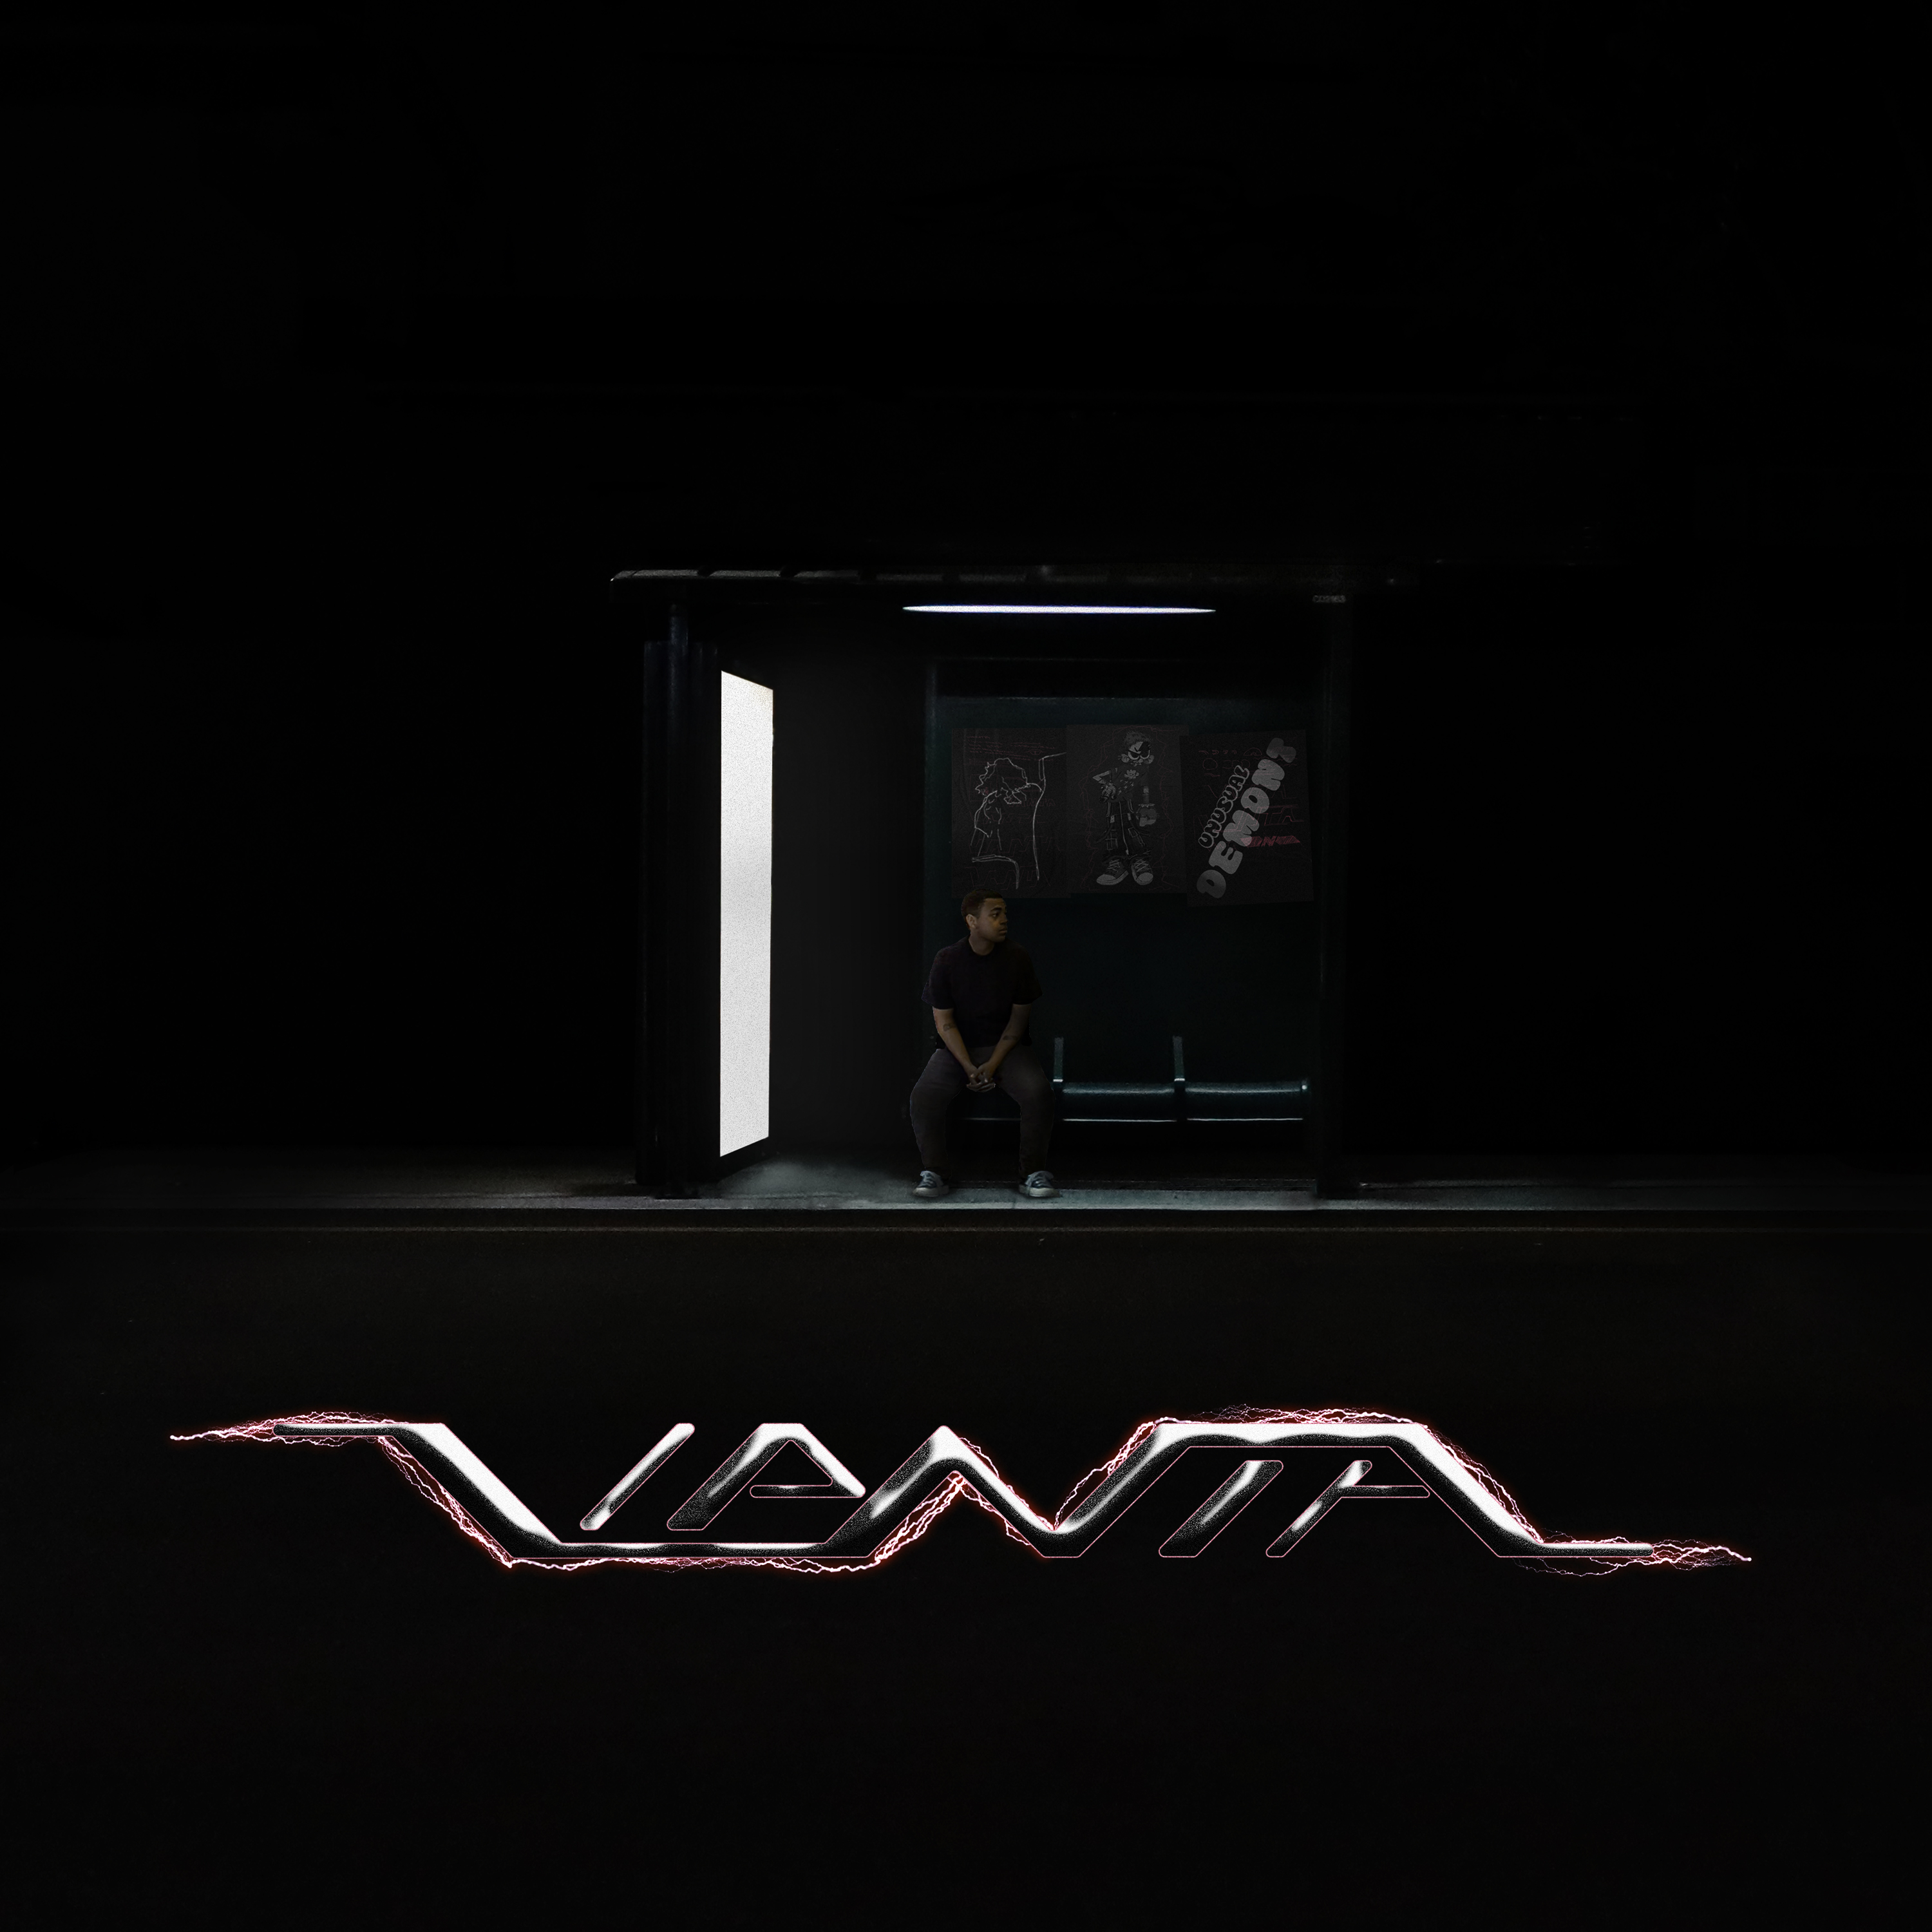 cover art for 'Vanta', the 4th single by Unusual Demont ahead of his debut project, HUES